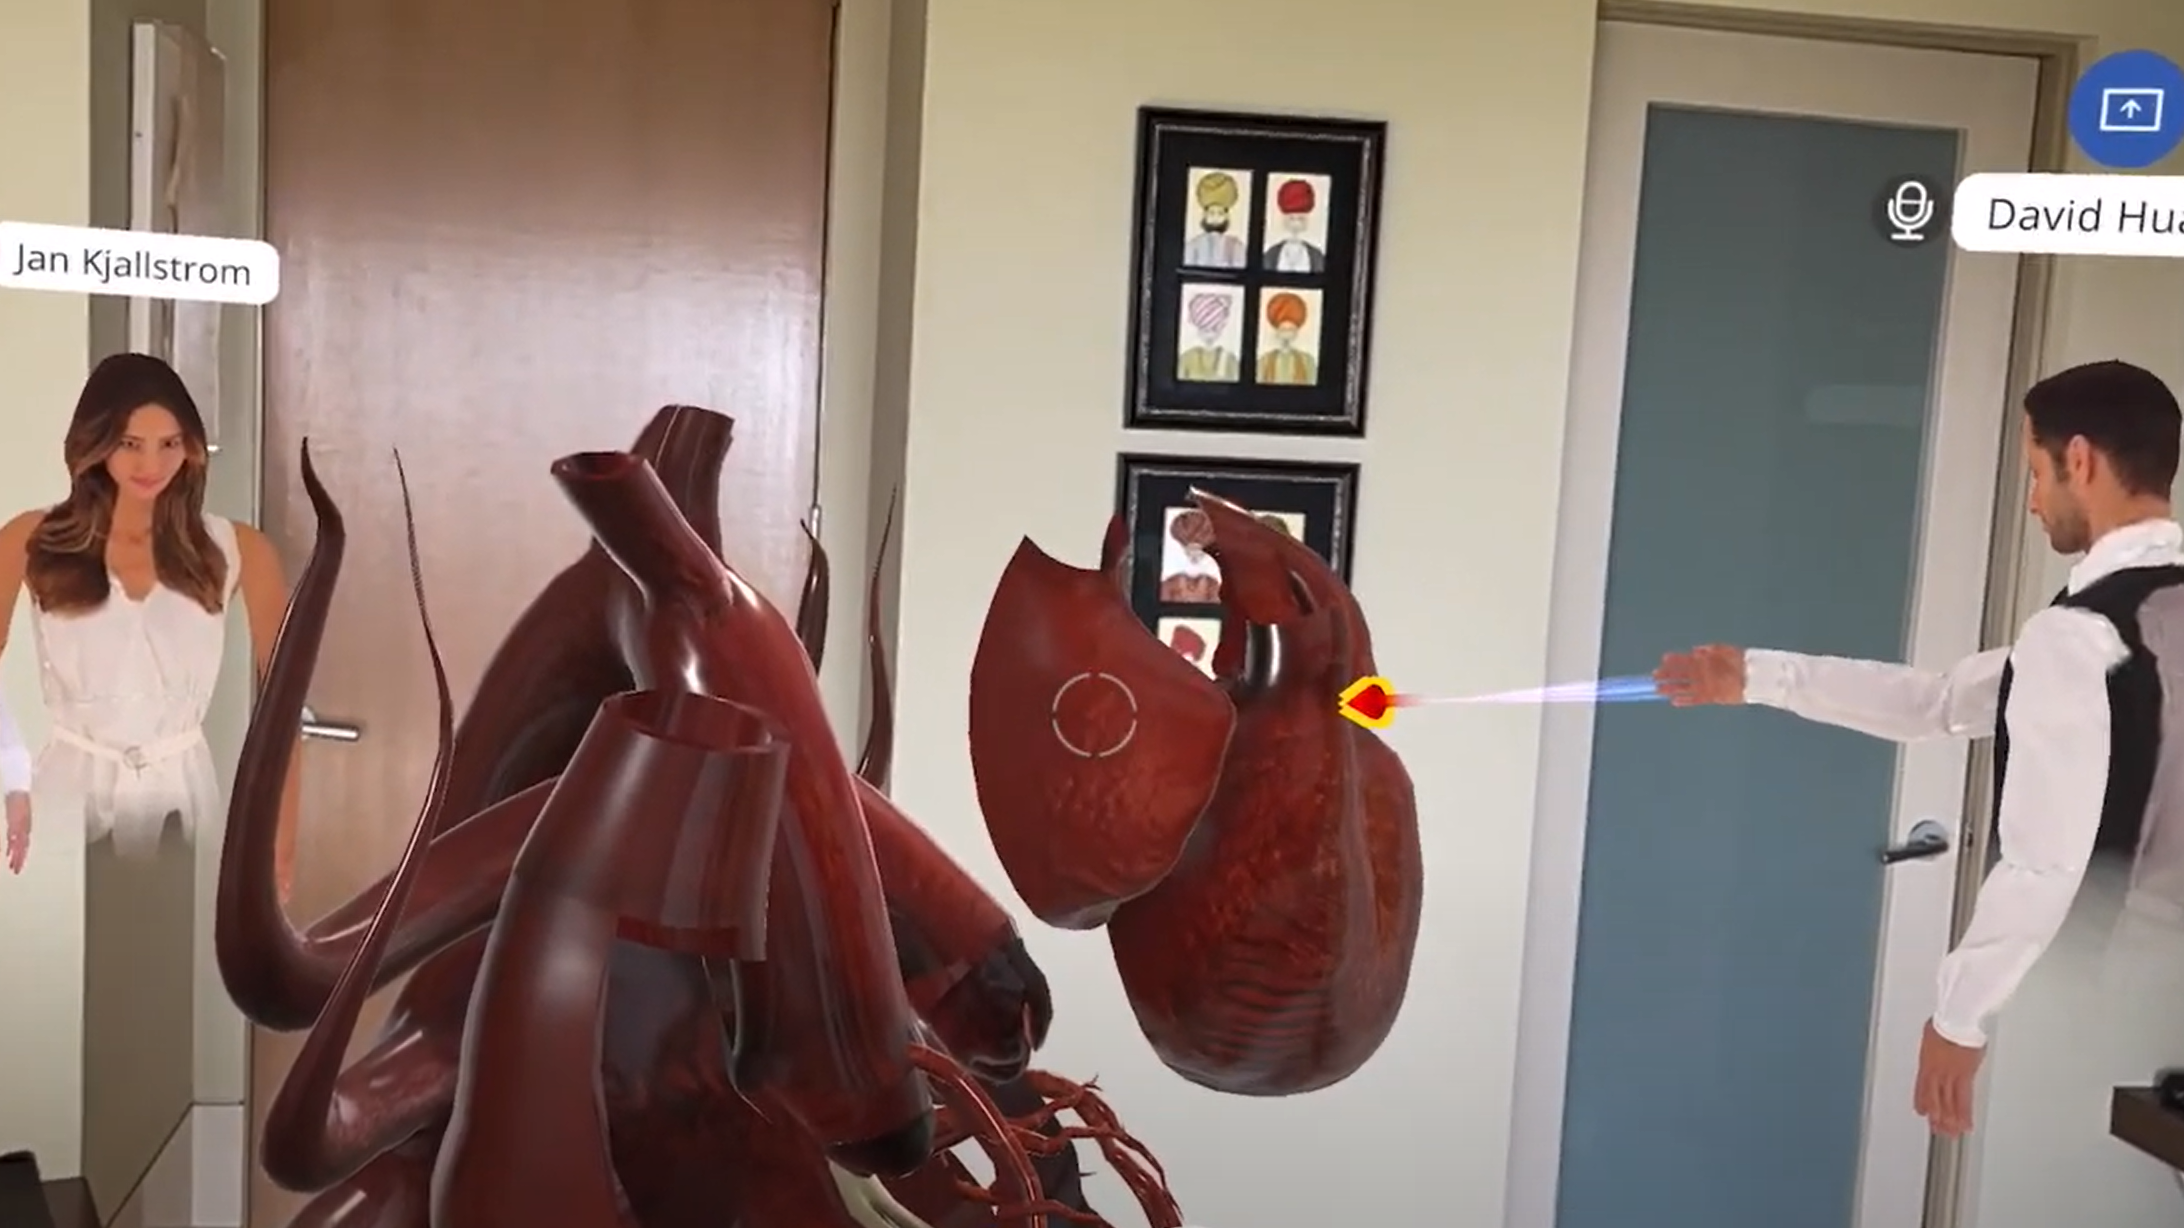 Heart Anatomy Dissection in Spatial Meetings